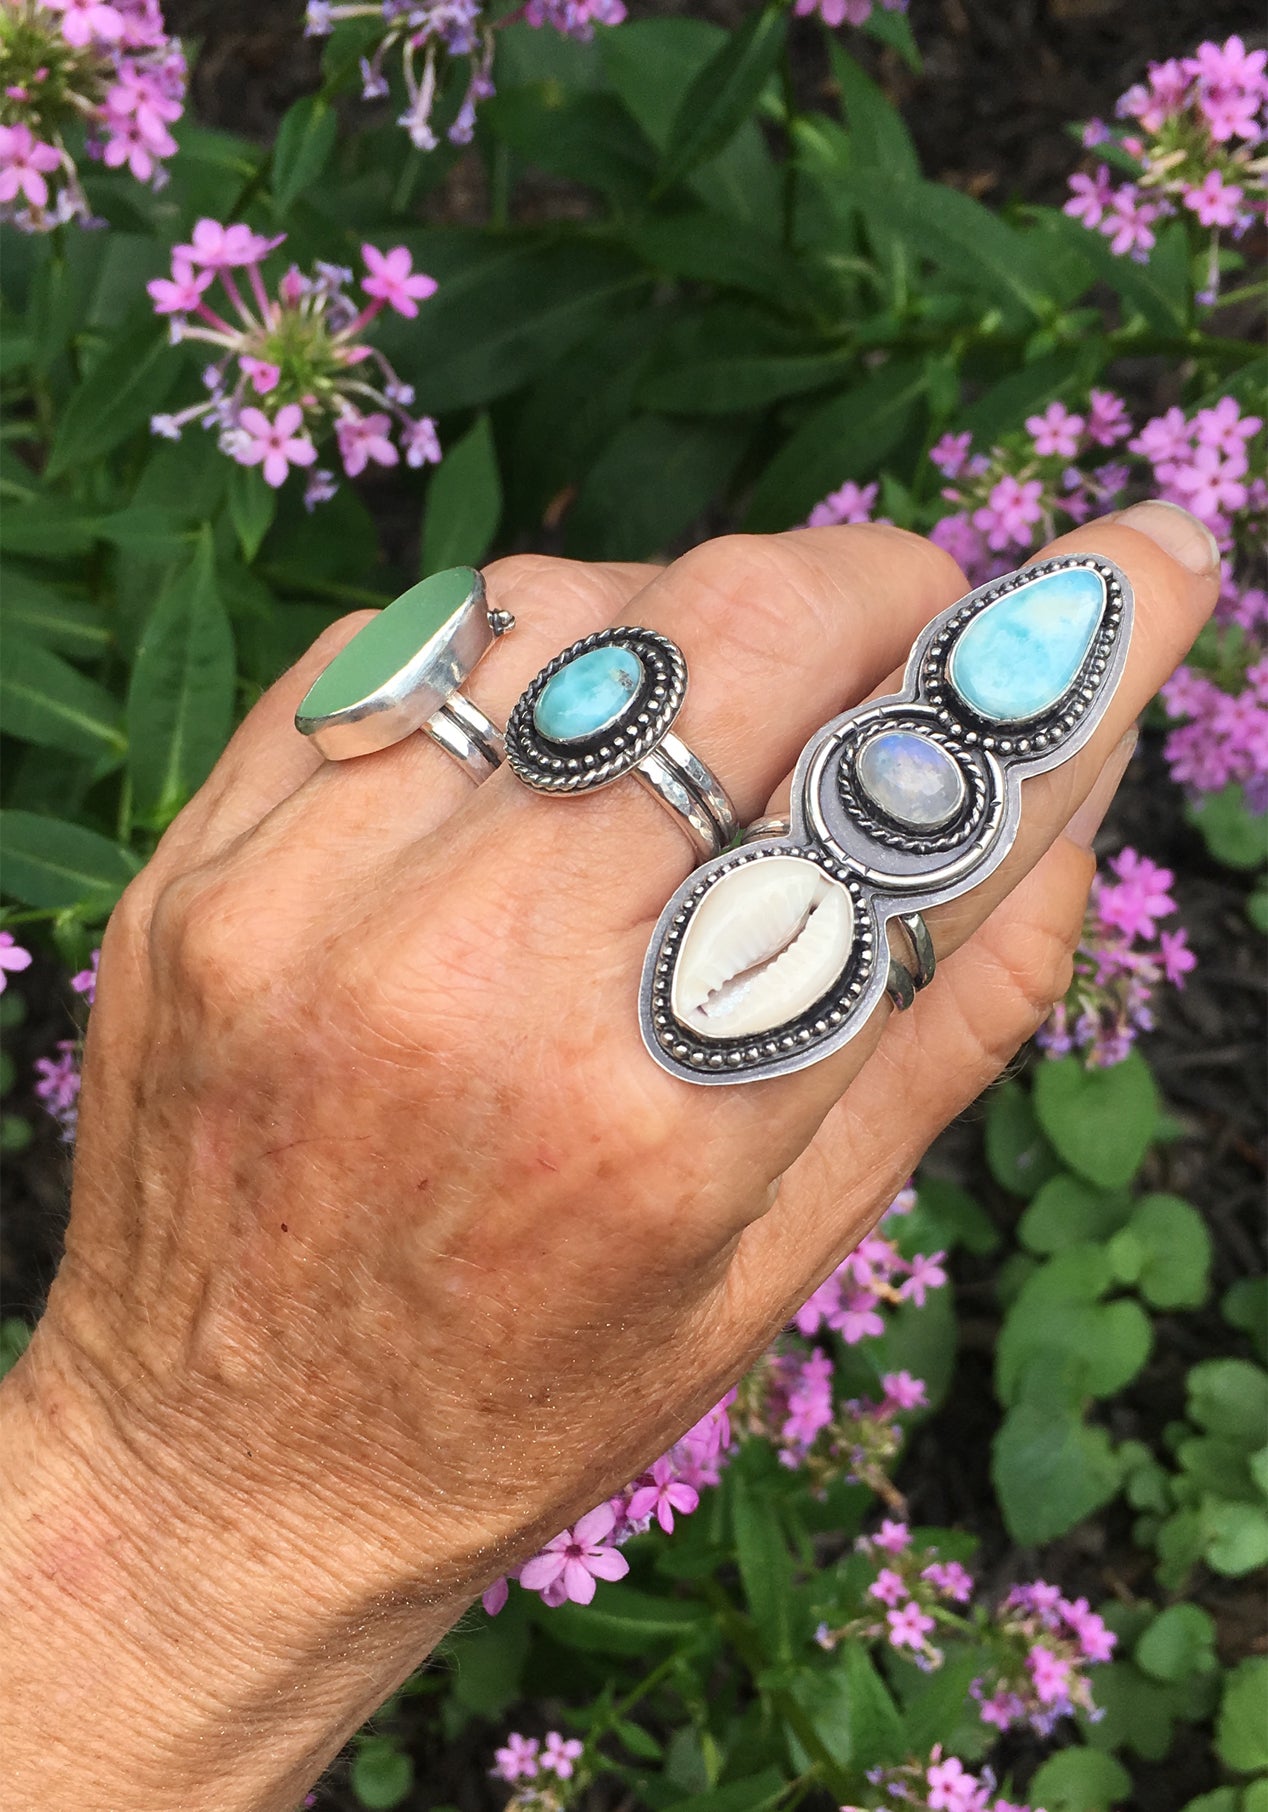 Alchemist Trio Ring with Larimar, Rainbow Moonstone and Cowrie Shell Shown on Hand